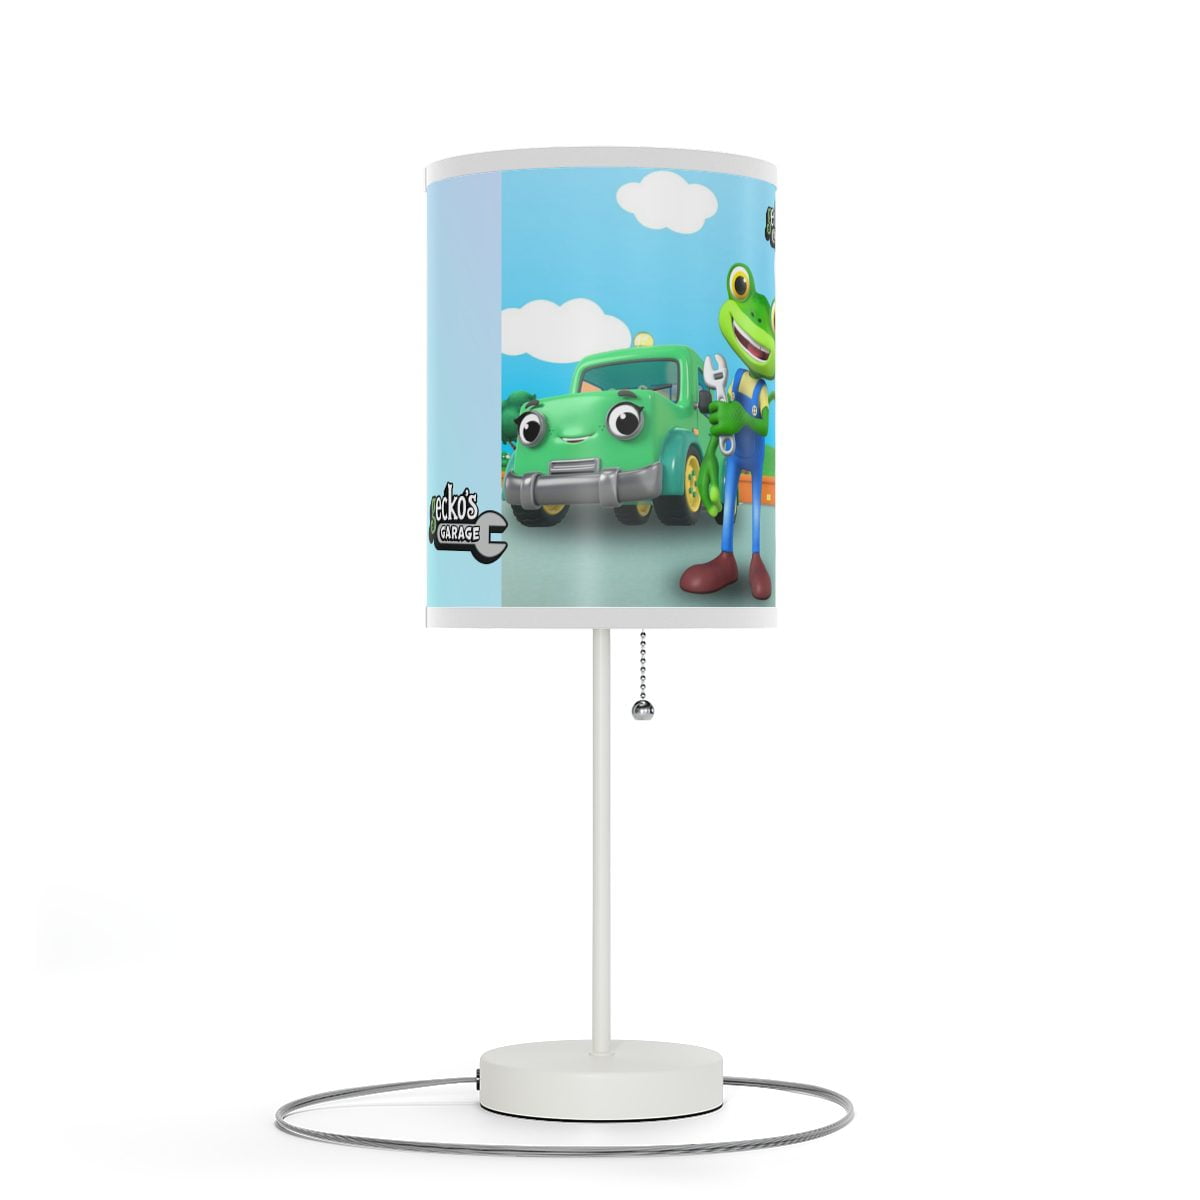 Gecko’s Garage Main Characters Lamp on a Stand Cool Kiddo 14